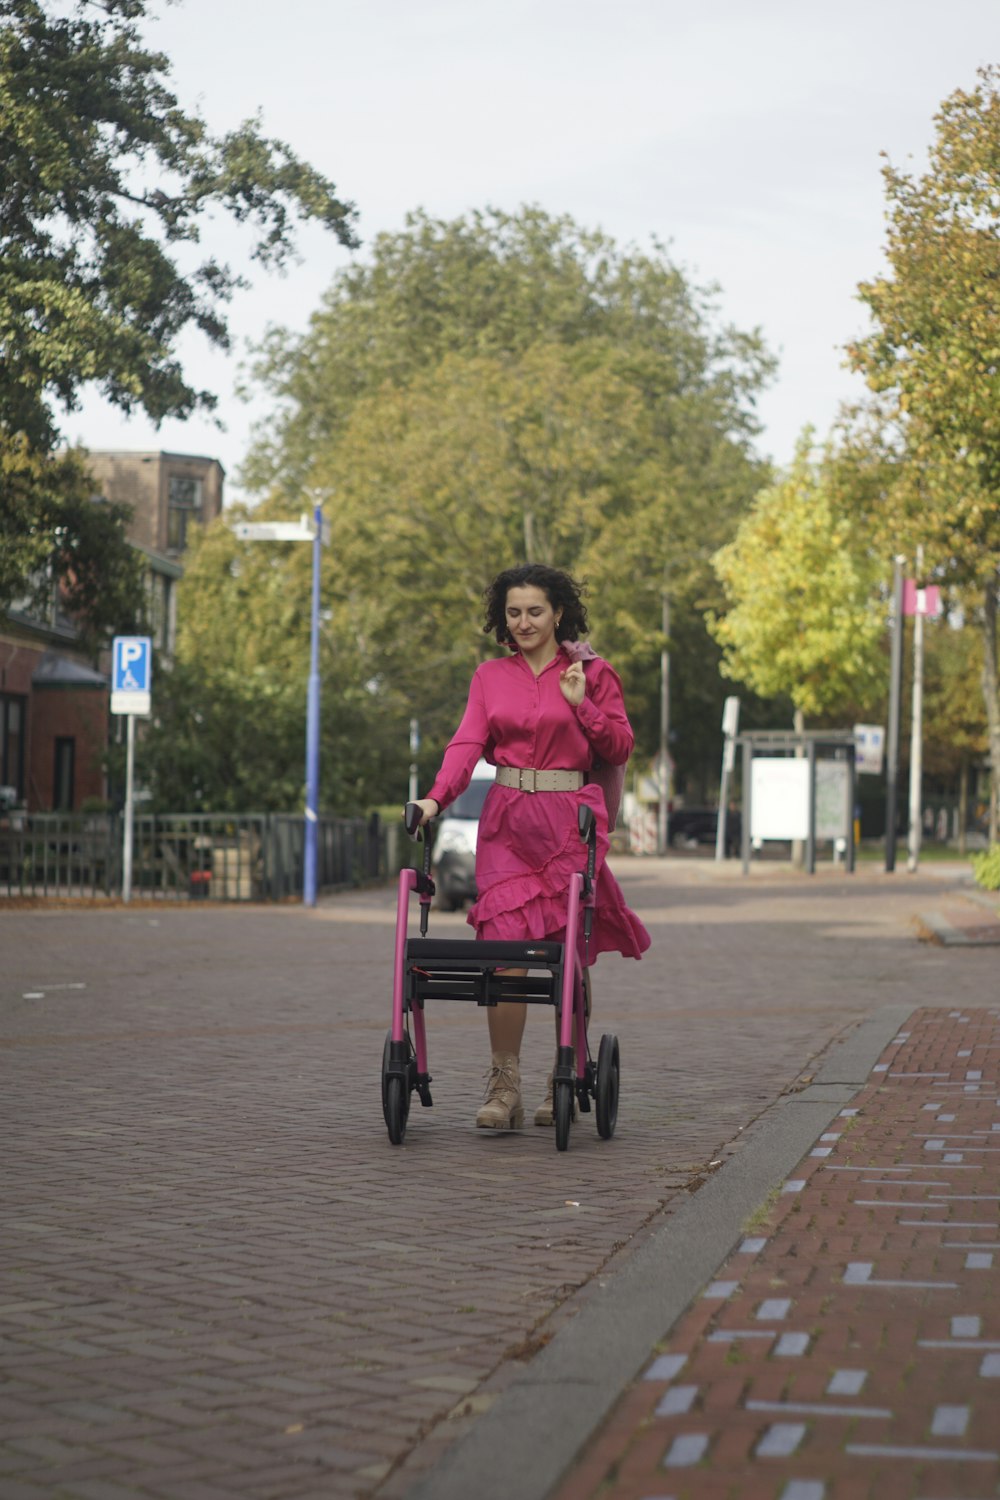 a woman in a pink dress pushing a stroller